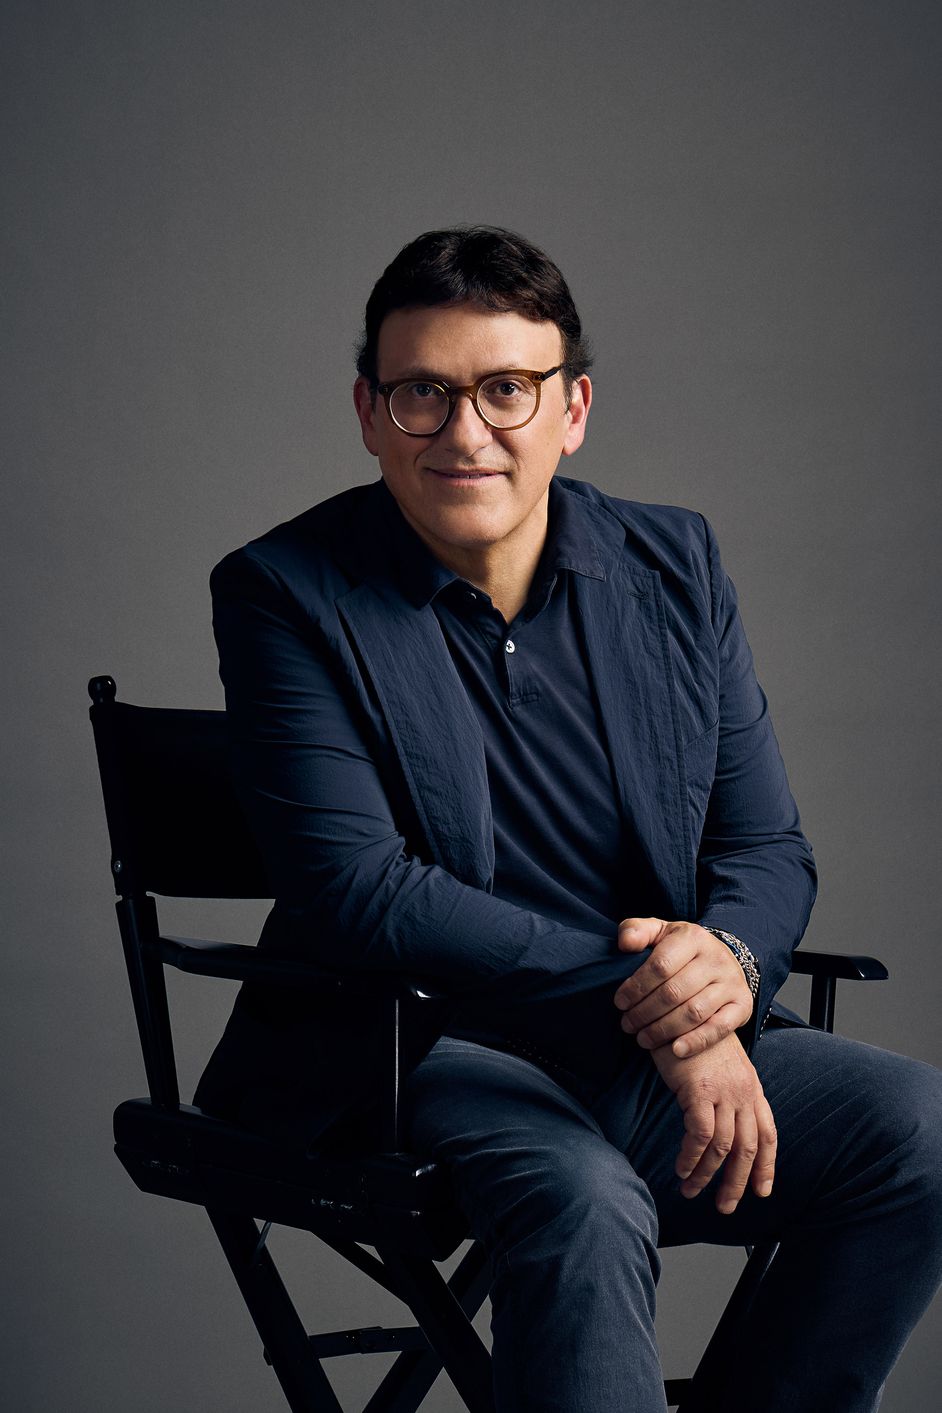 A portrait of Anthony Russo sitting in his director’s chair.